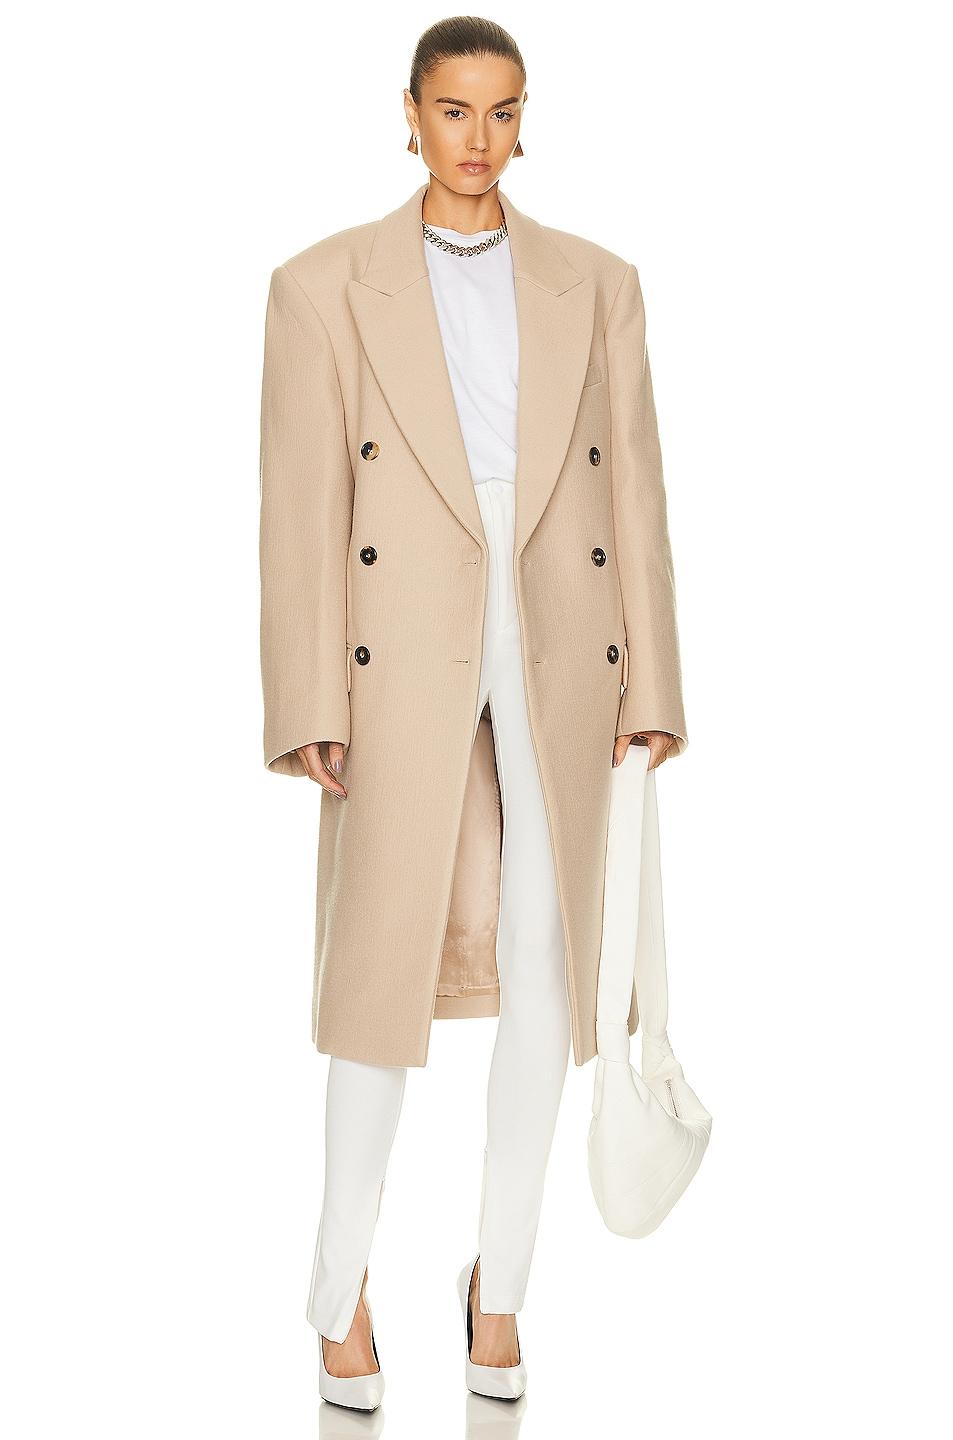 Wardrobe NYC X Hailey Bieber Hb Coat in Natural | Lyst